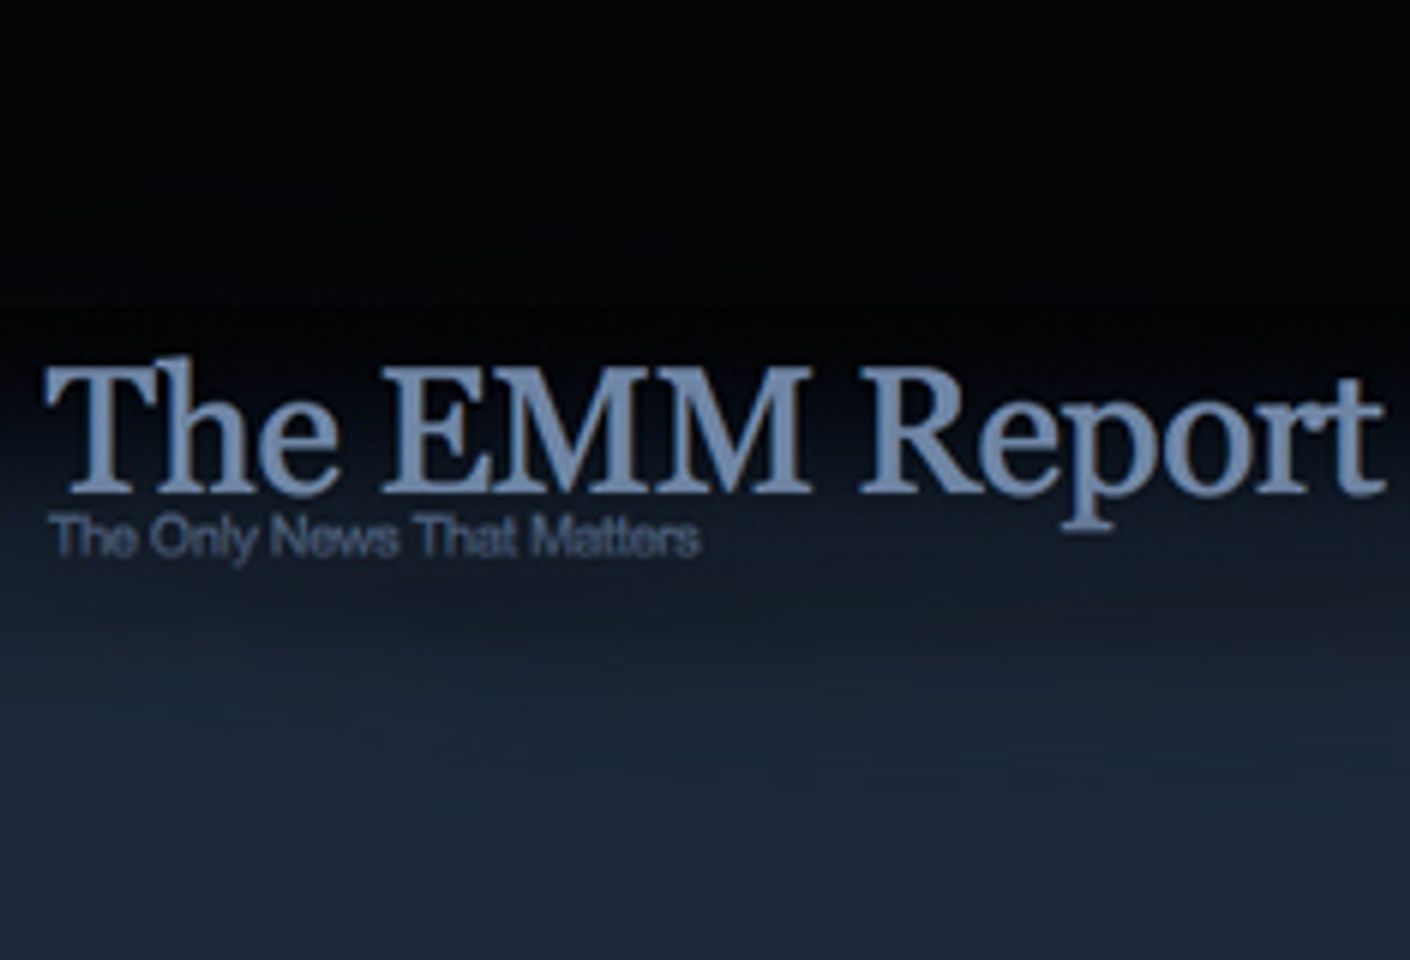 EMM Media Blog Launched with Daily News Flashes